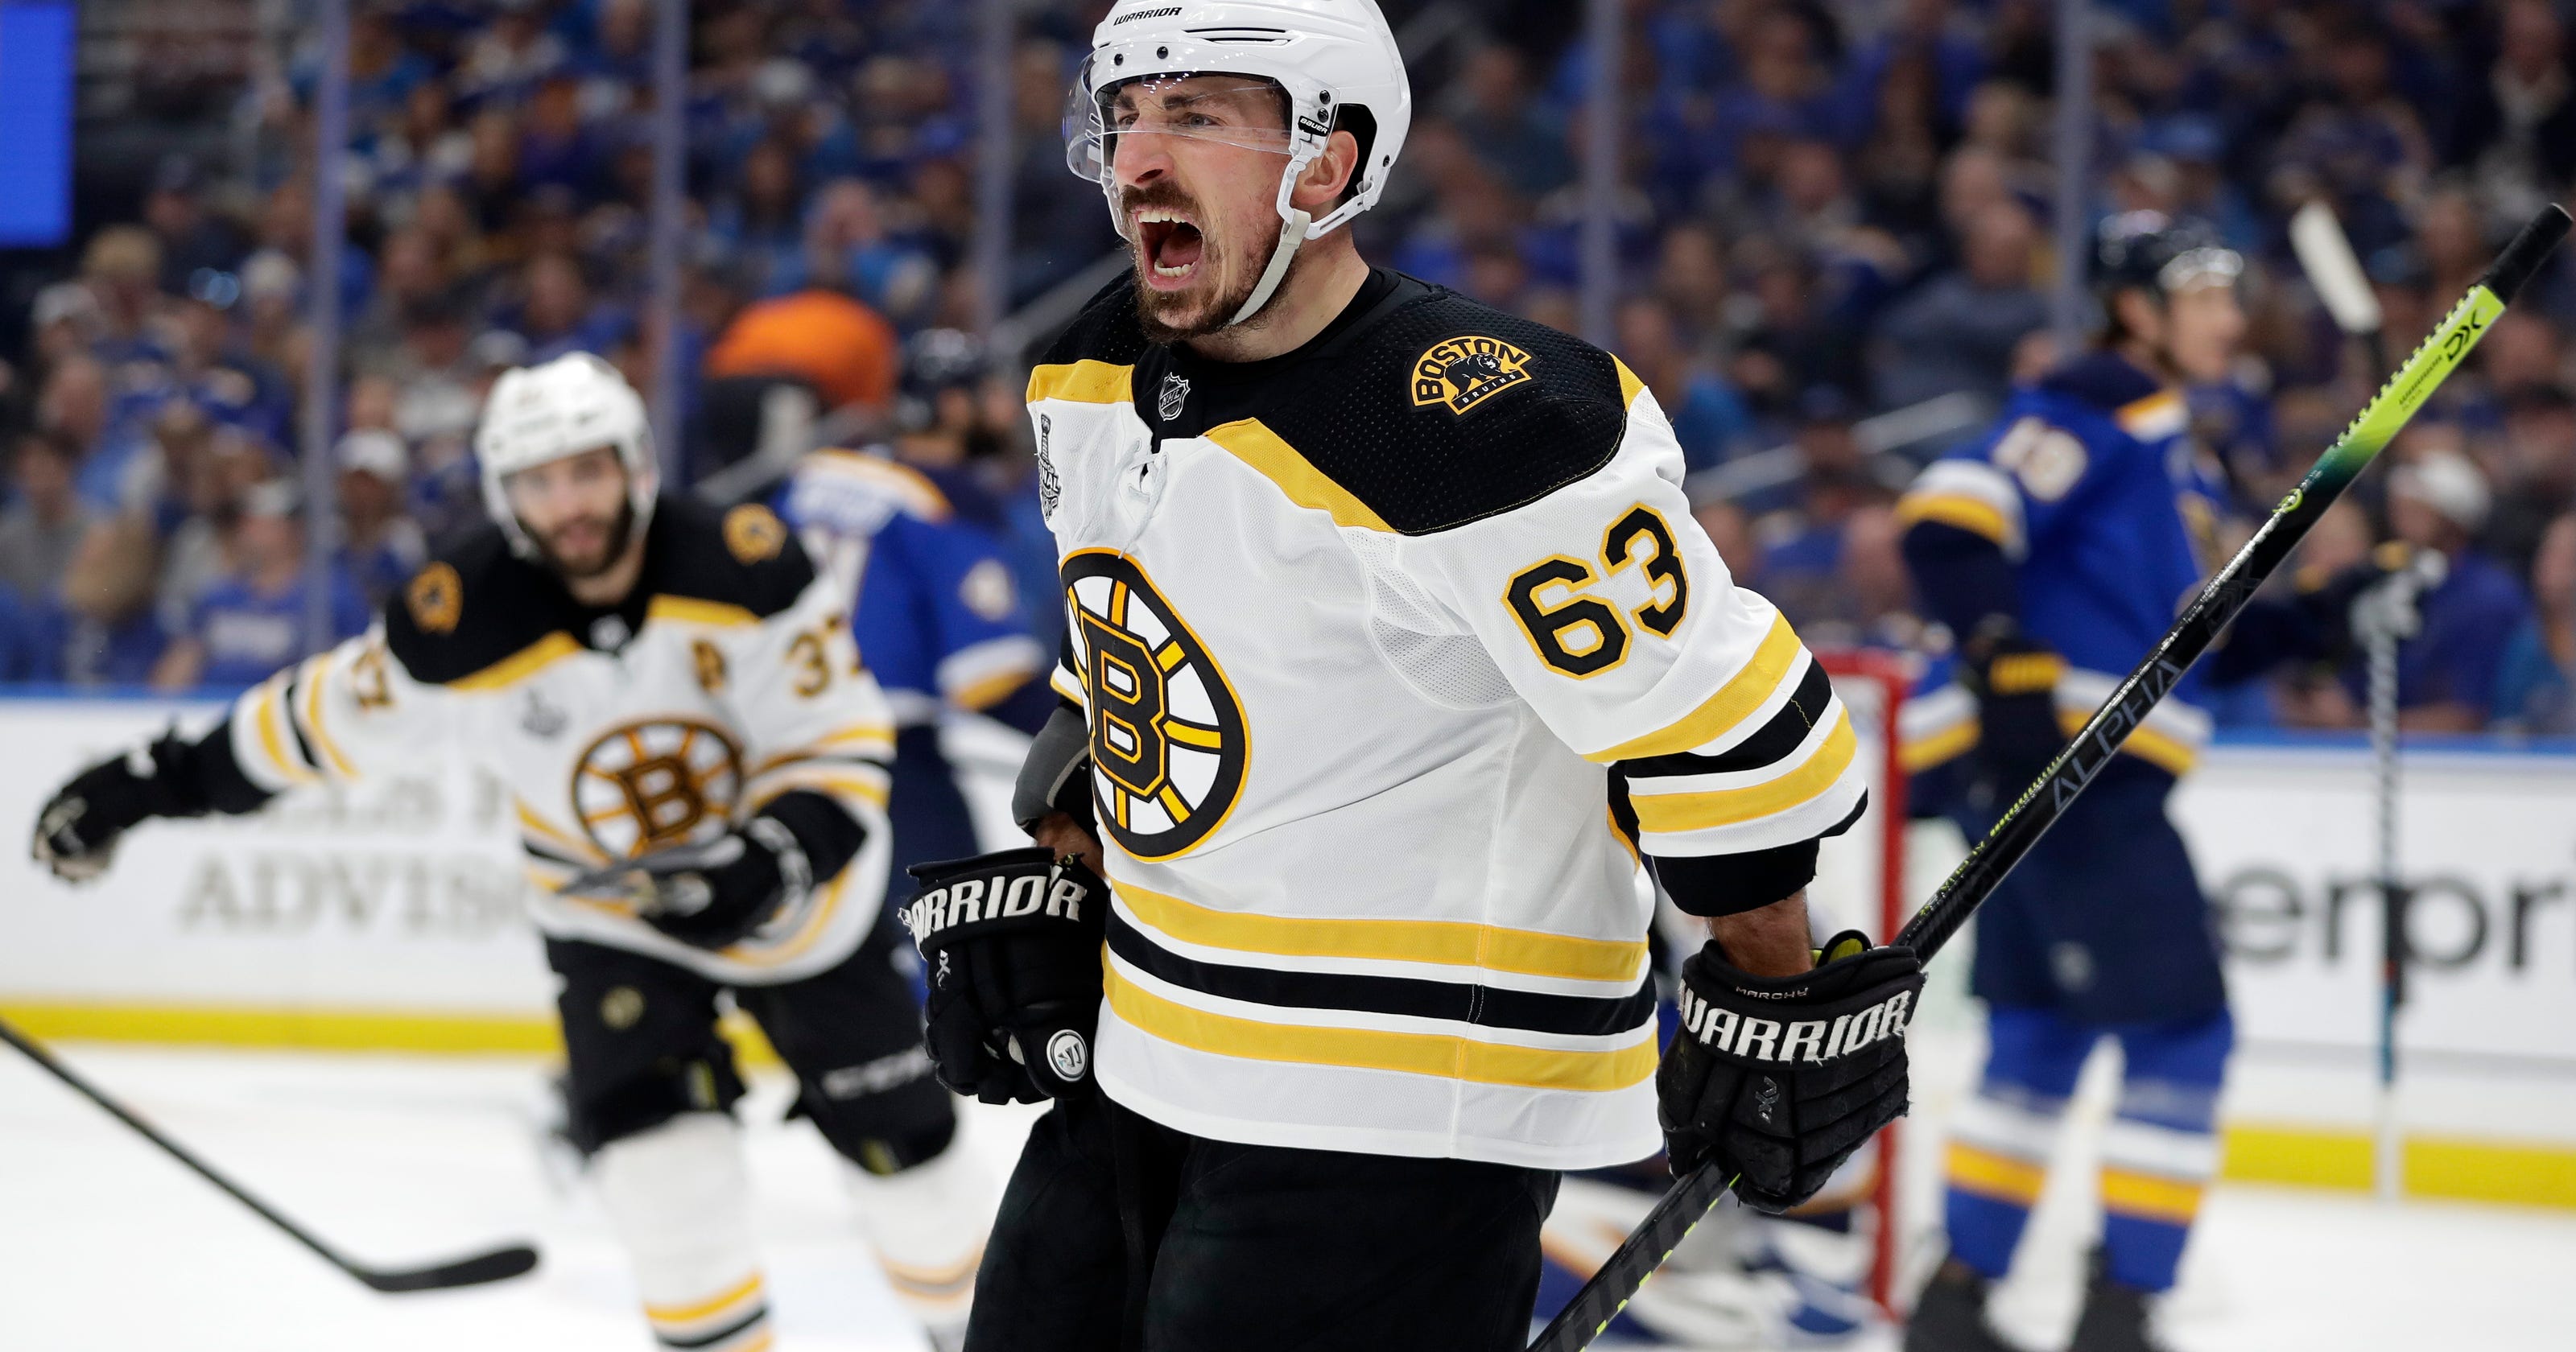 The Latest: Boston Bruins force Game 7 in Stanley Cup Final